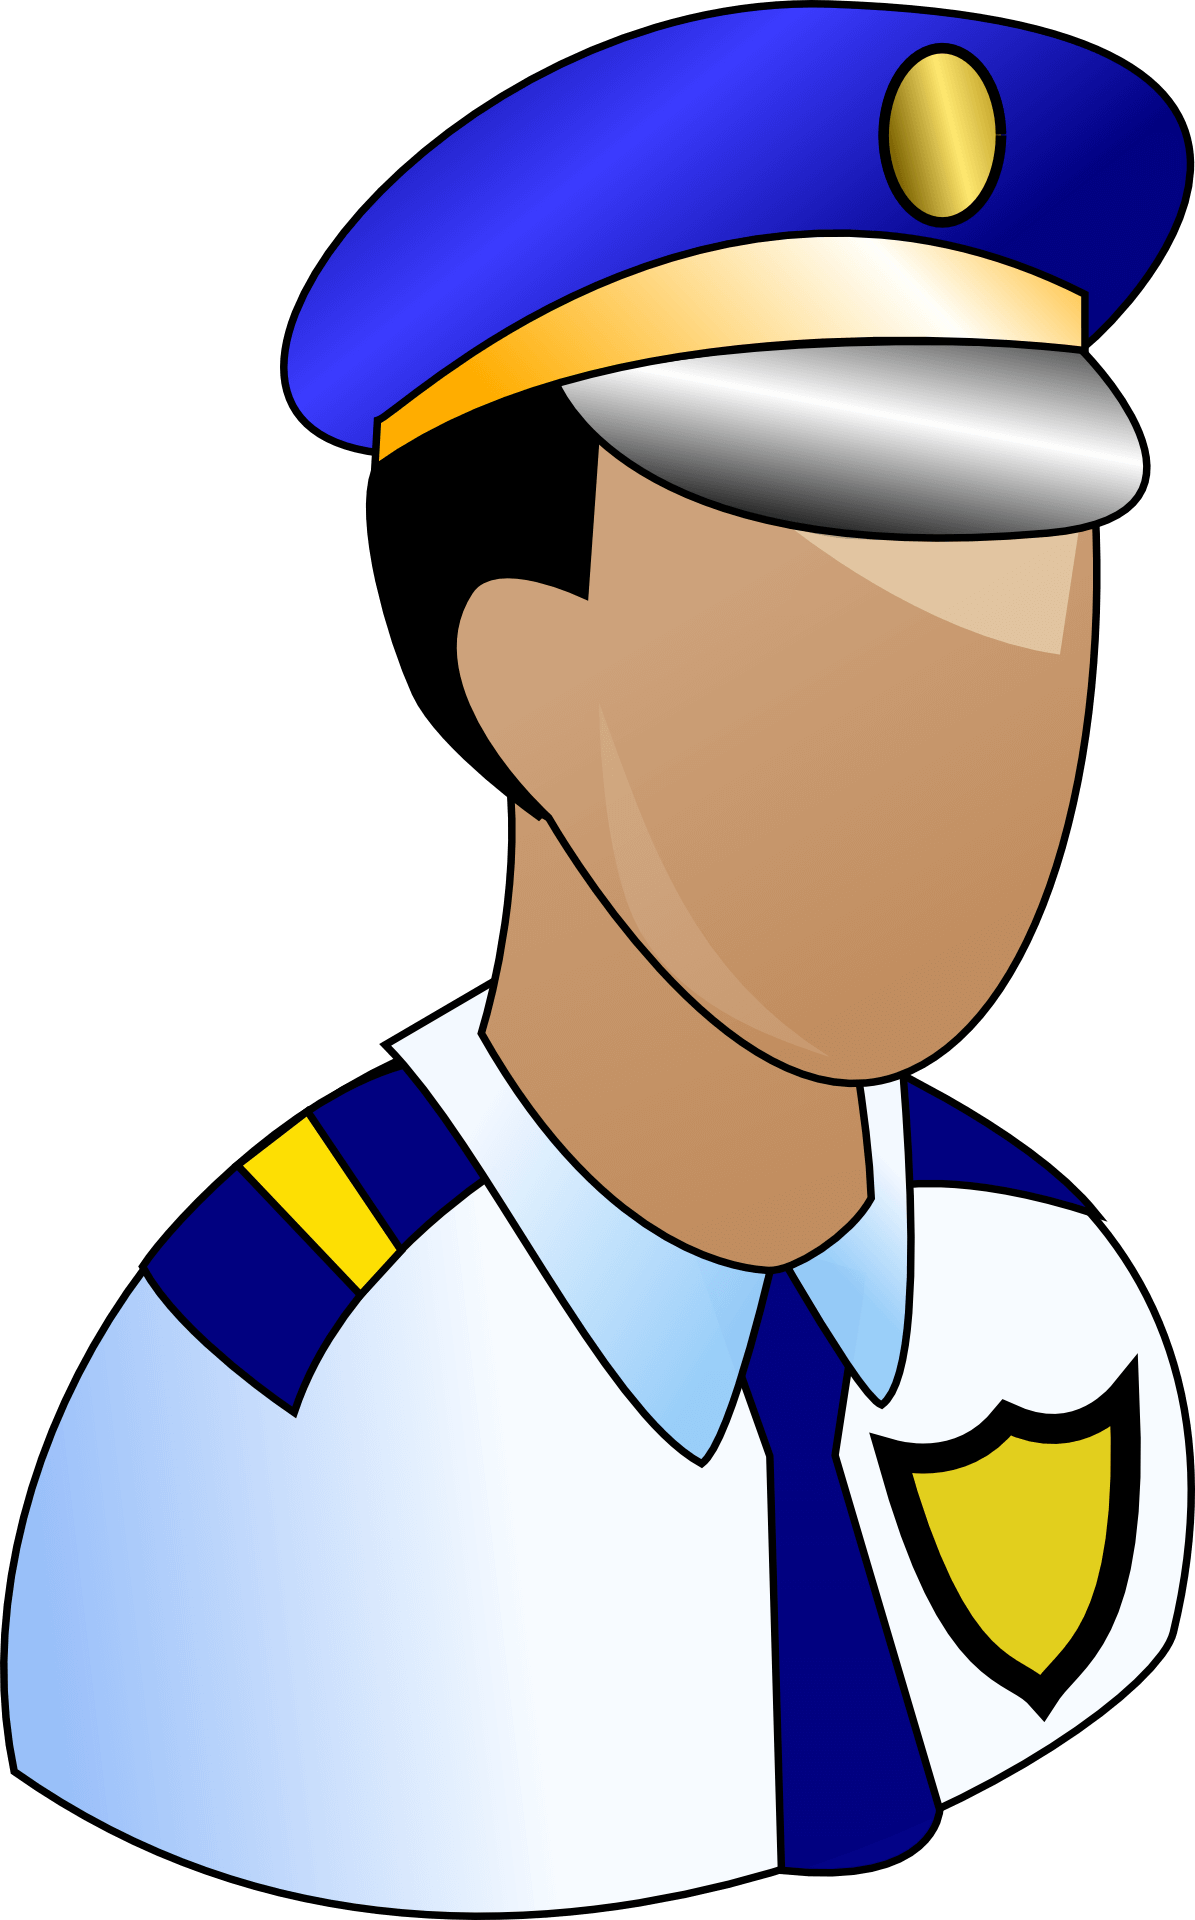 indians clipart policeman indian